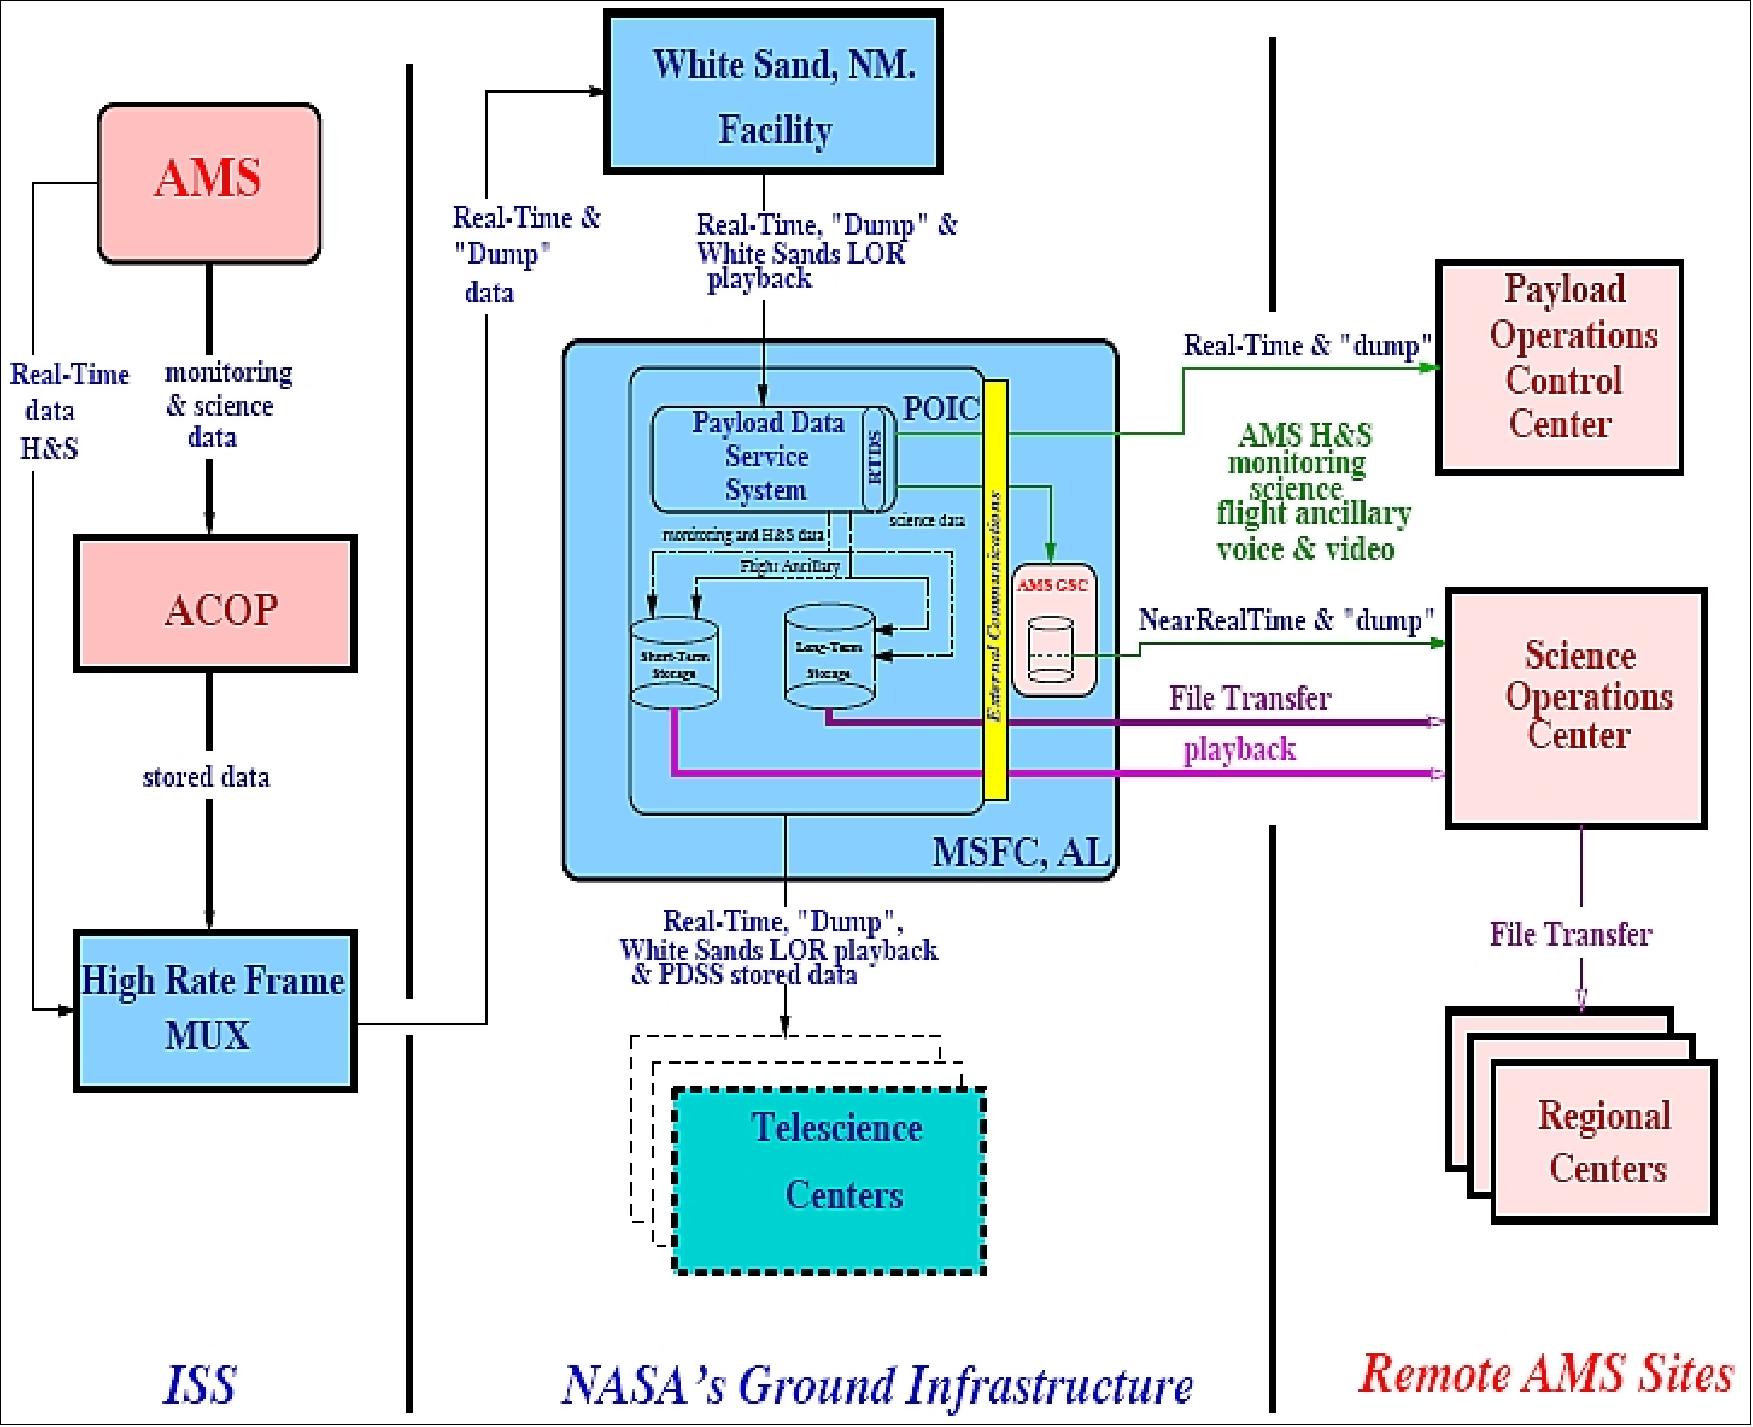 Figure 61: ISS to Remote AMS Centers Data Flow (image credit: NASA) 110)